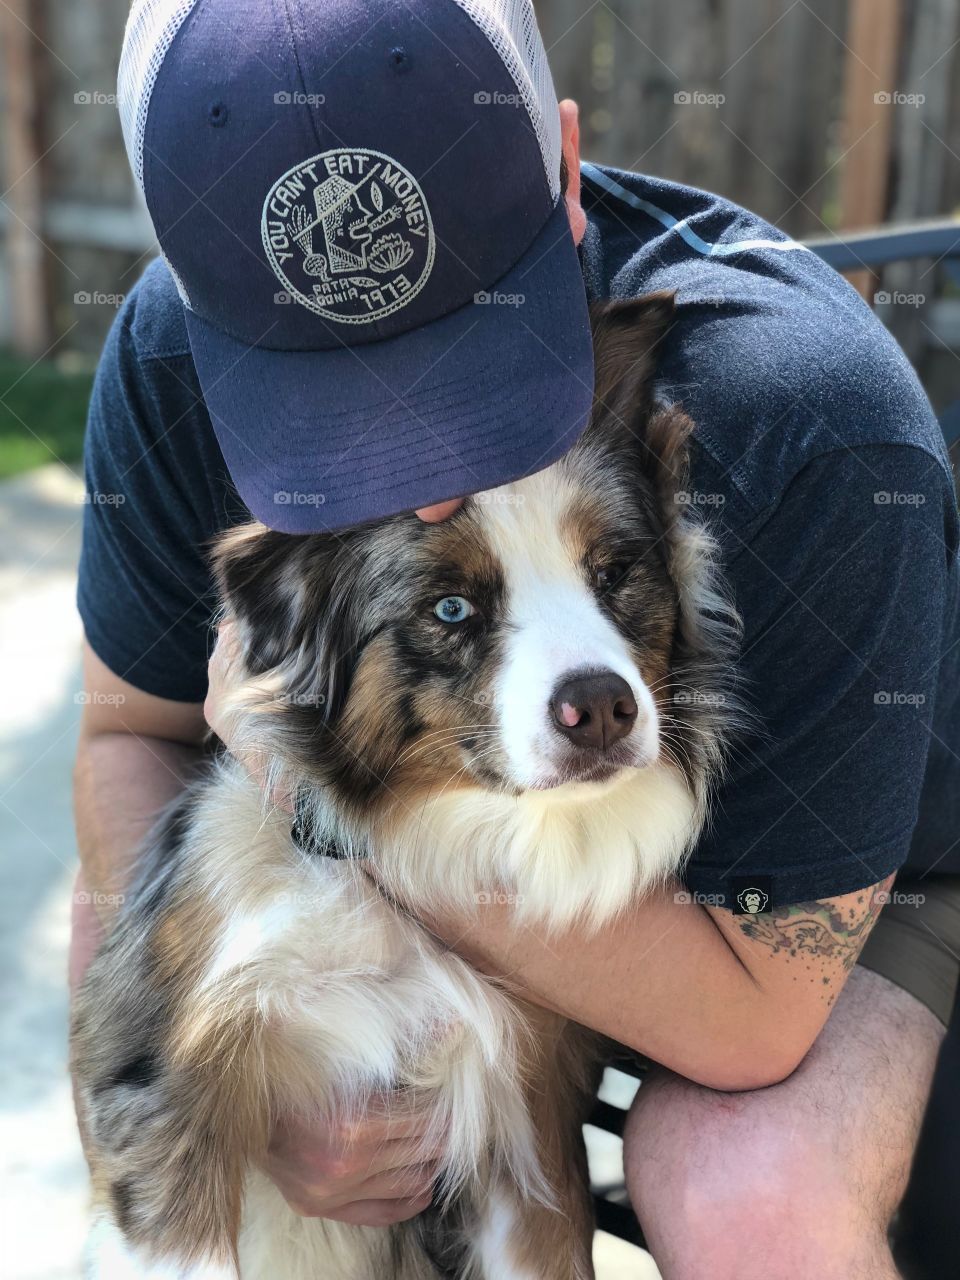 My fiancé and our Aussie in Boise, Idaho. We were just hanging out in the backyard of our Airbnb and I snapped this photo with my IPhone 7Plus. 